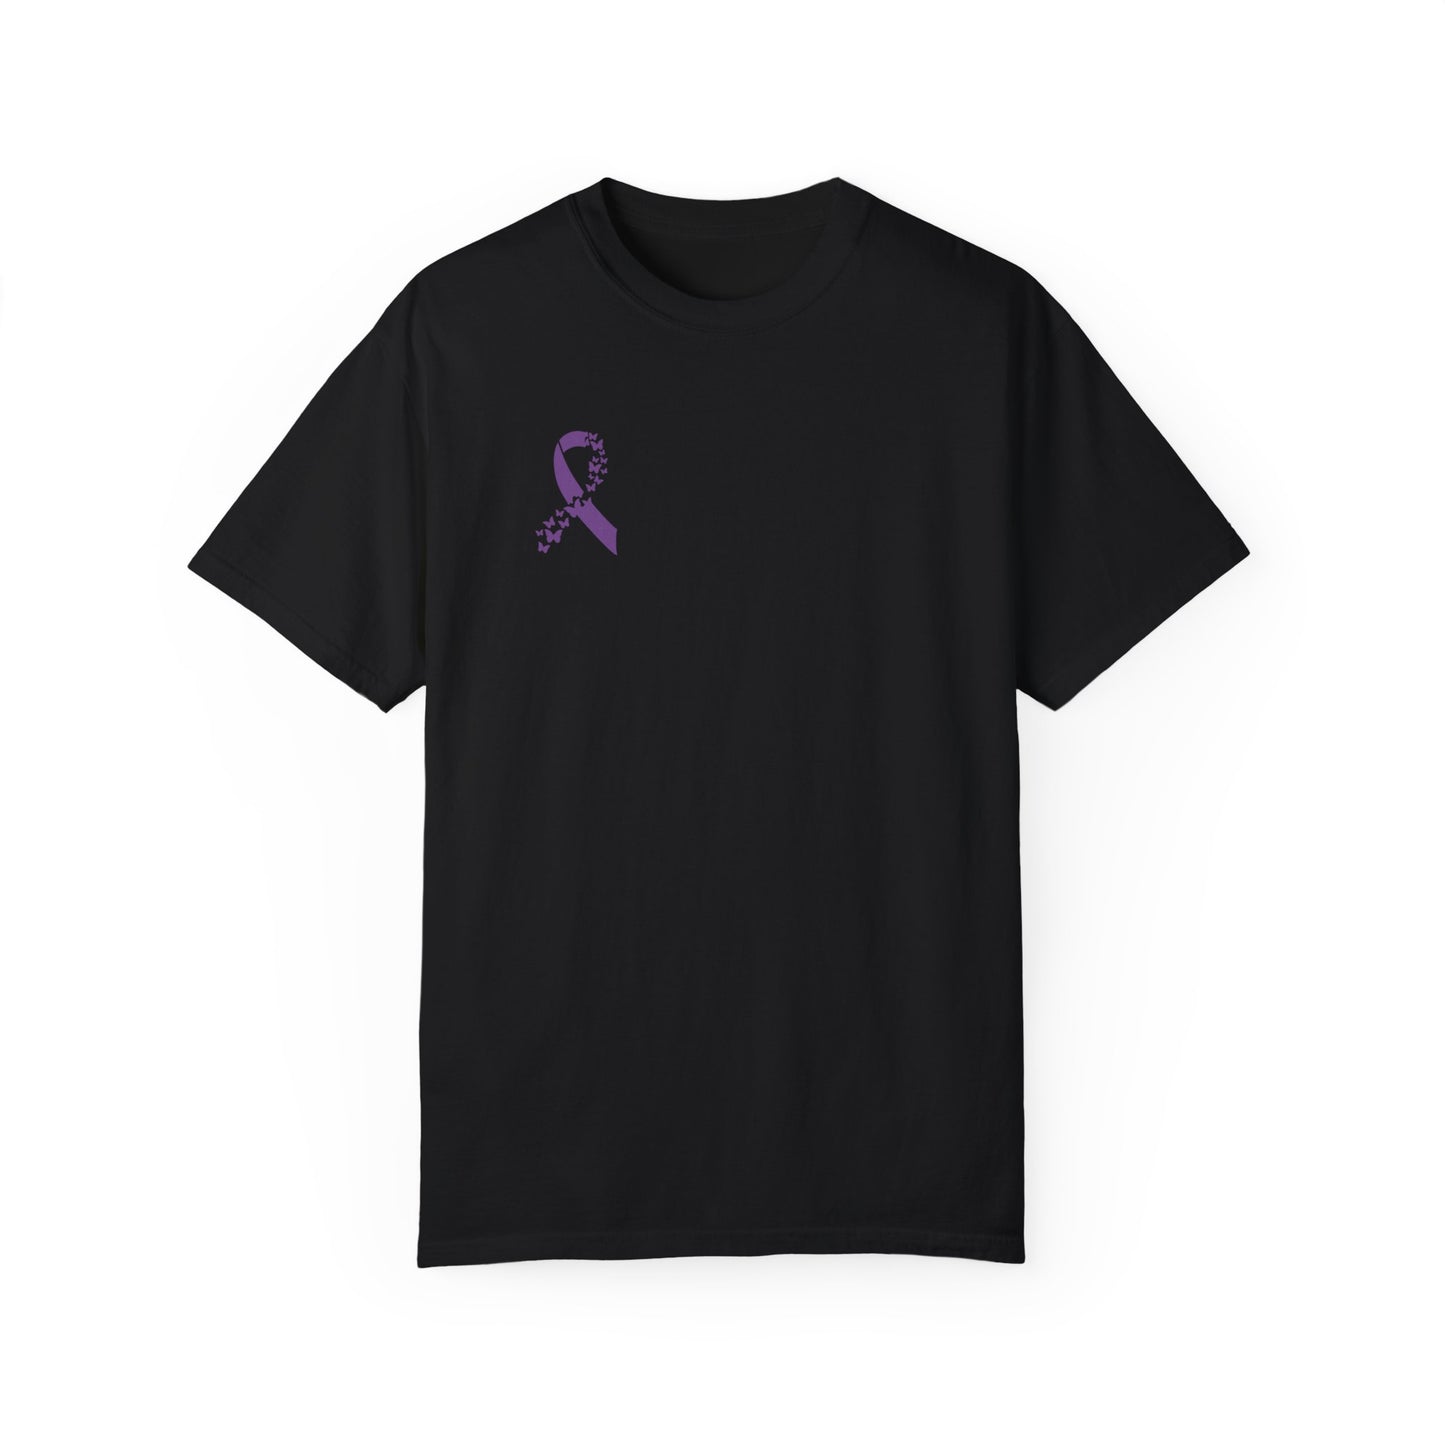 Support the fight Lupus T-shirt